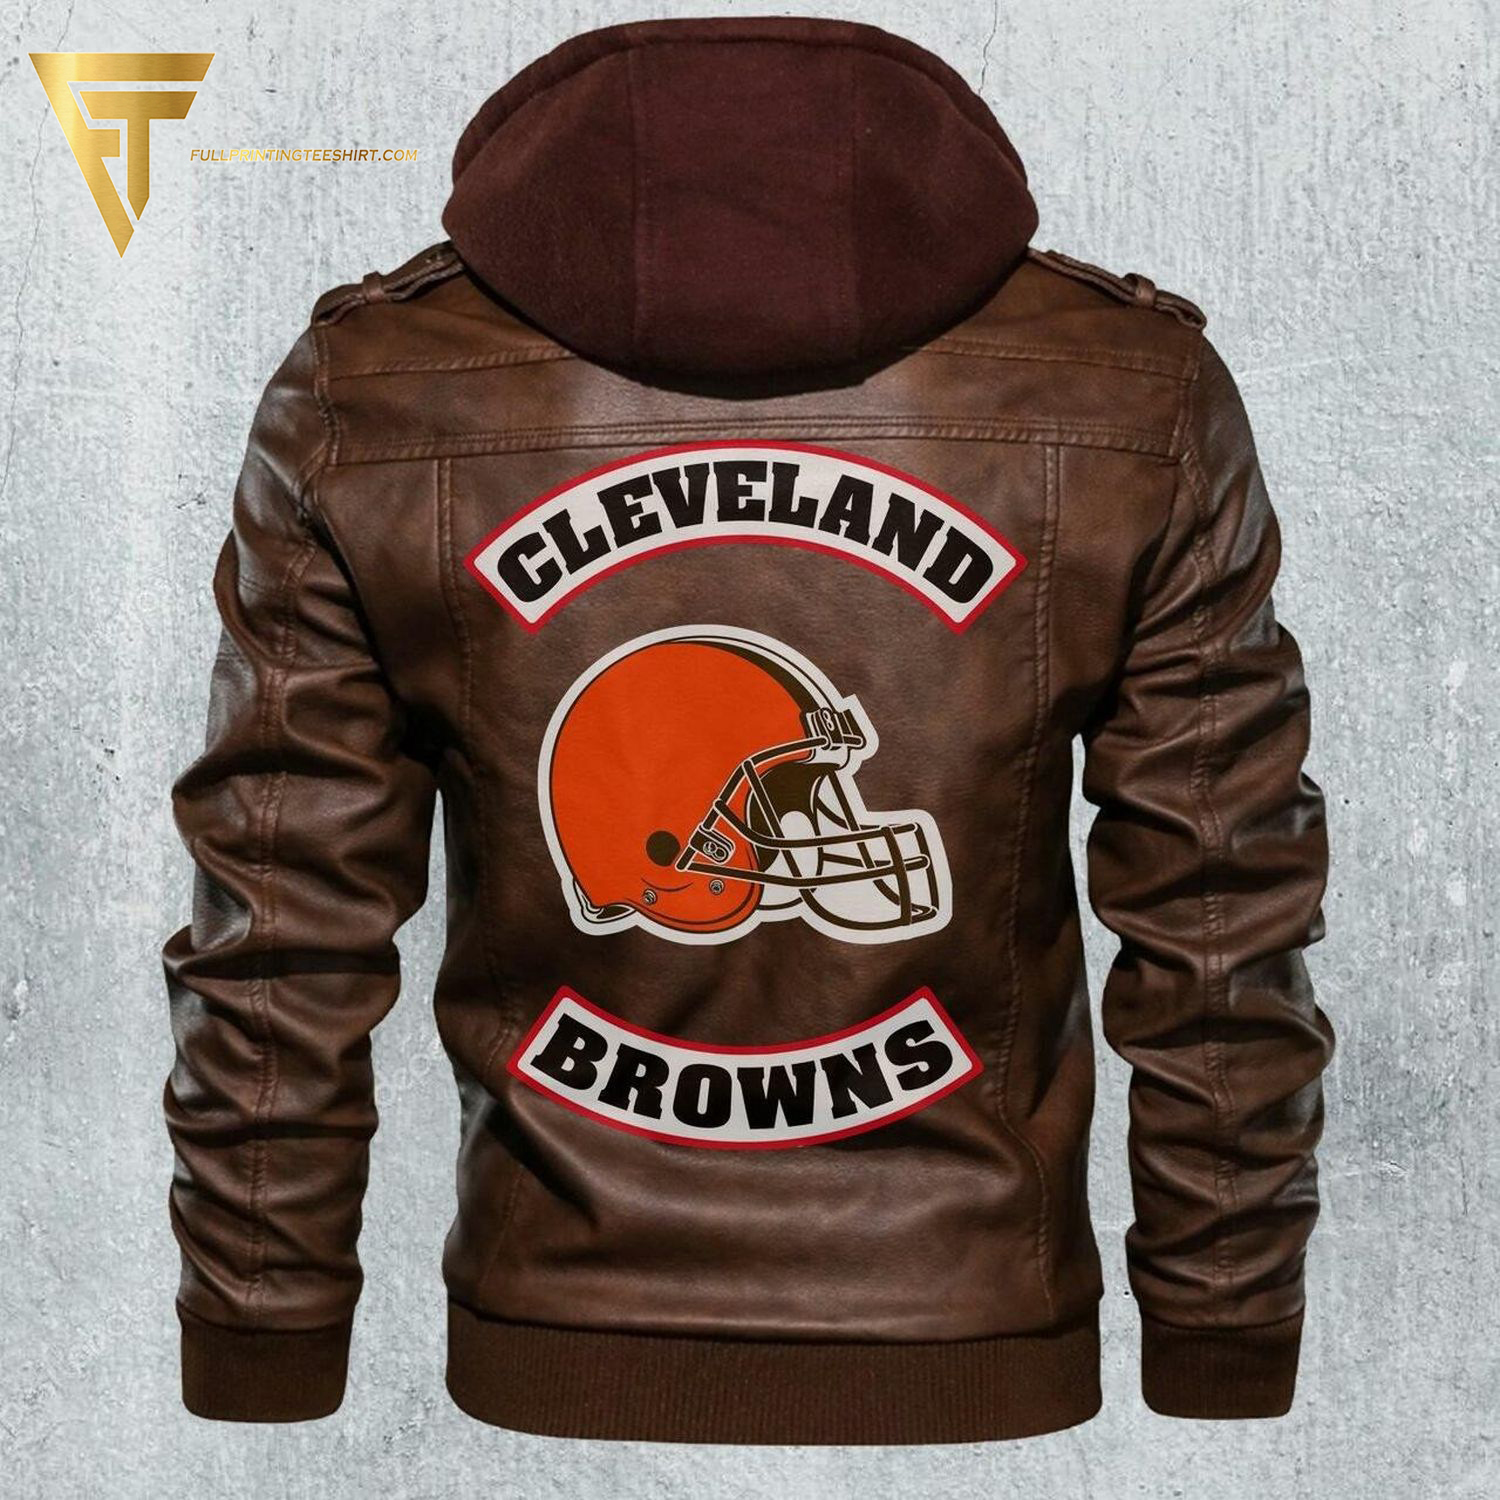 NFL Cleveland Browns Football Team Leather Jacket